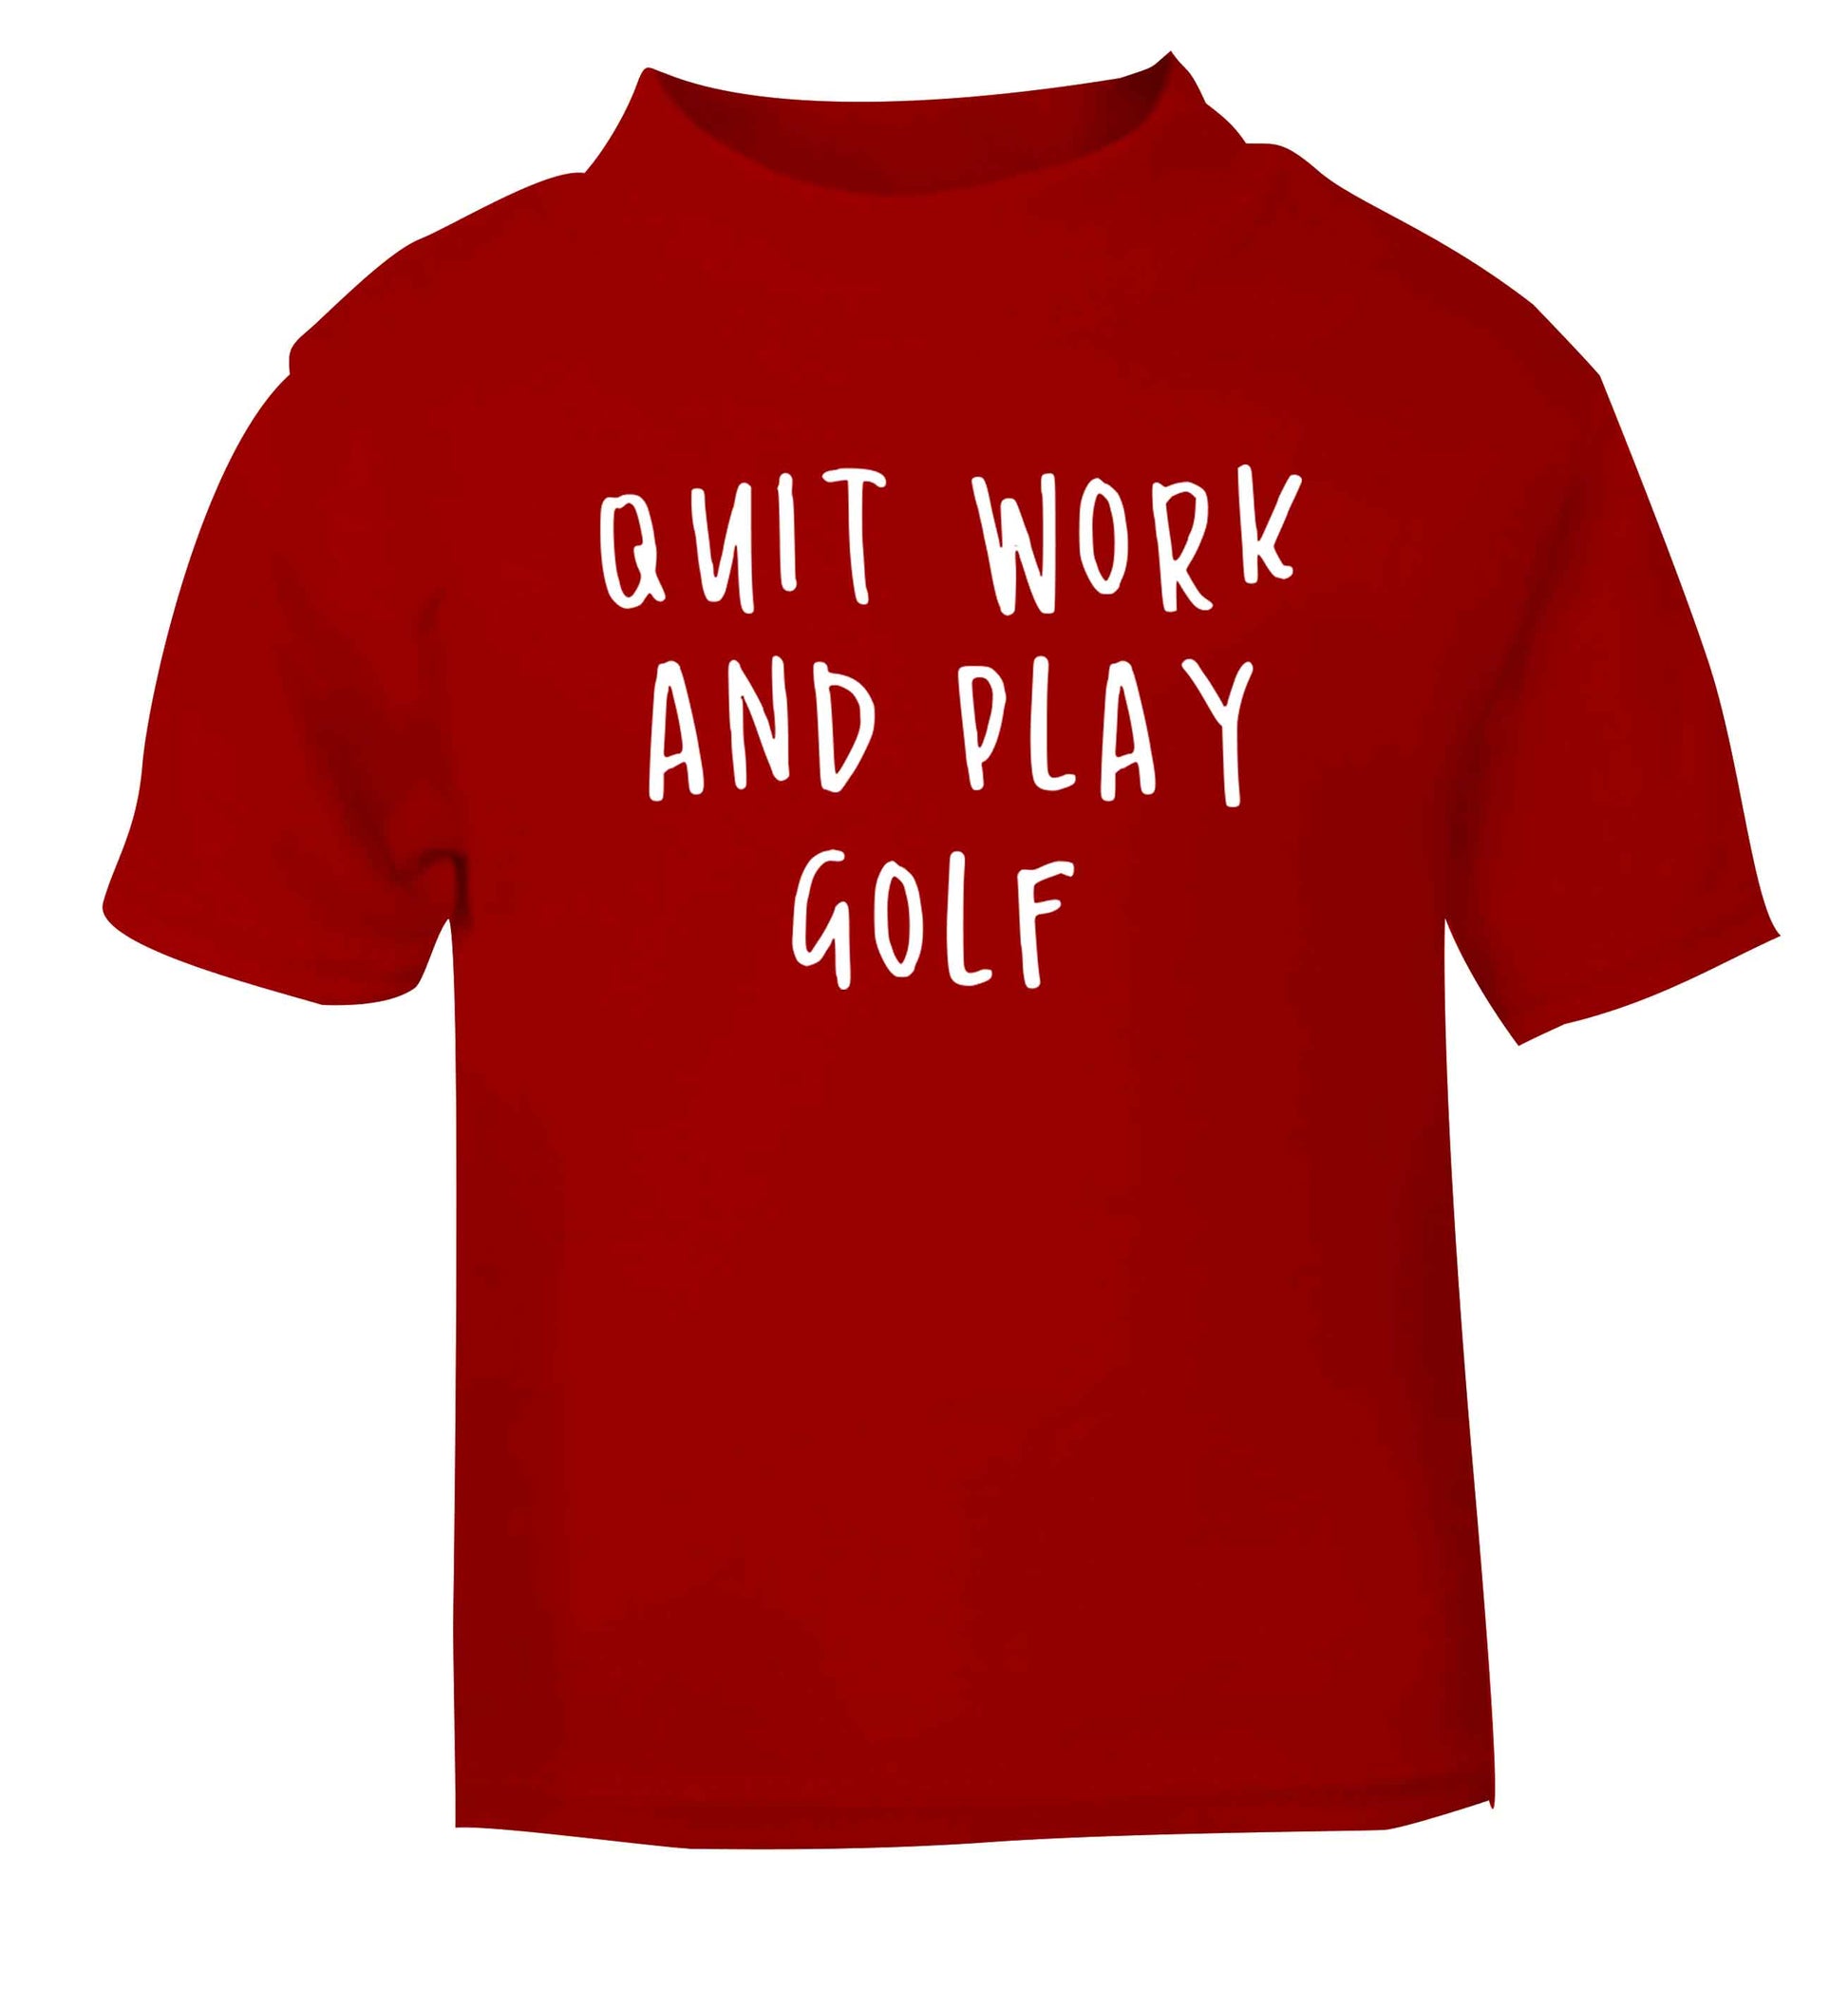 Quit work and play golf red Baby Toddler Tshirt 2 Years